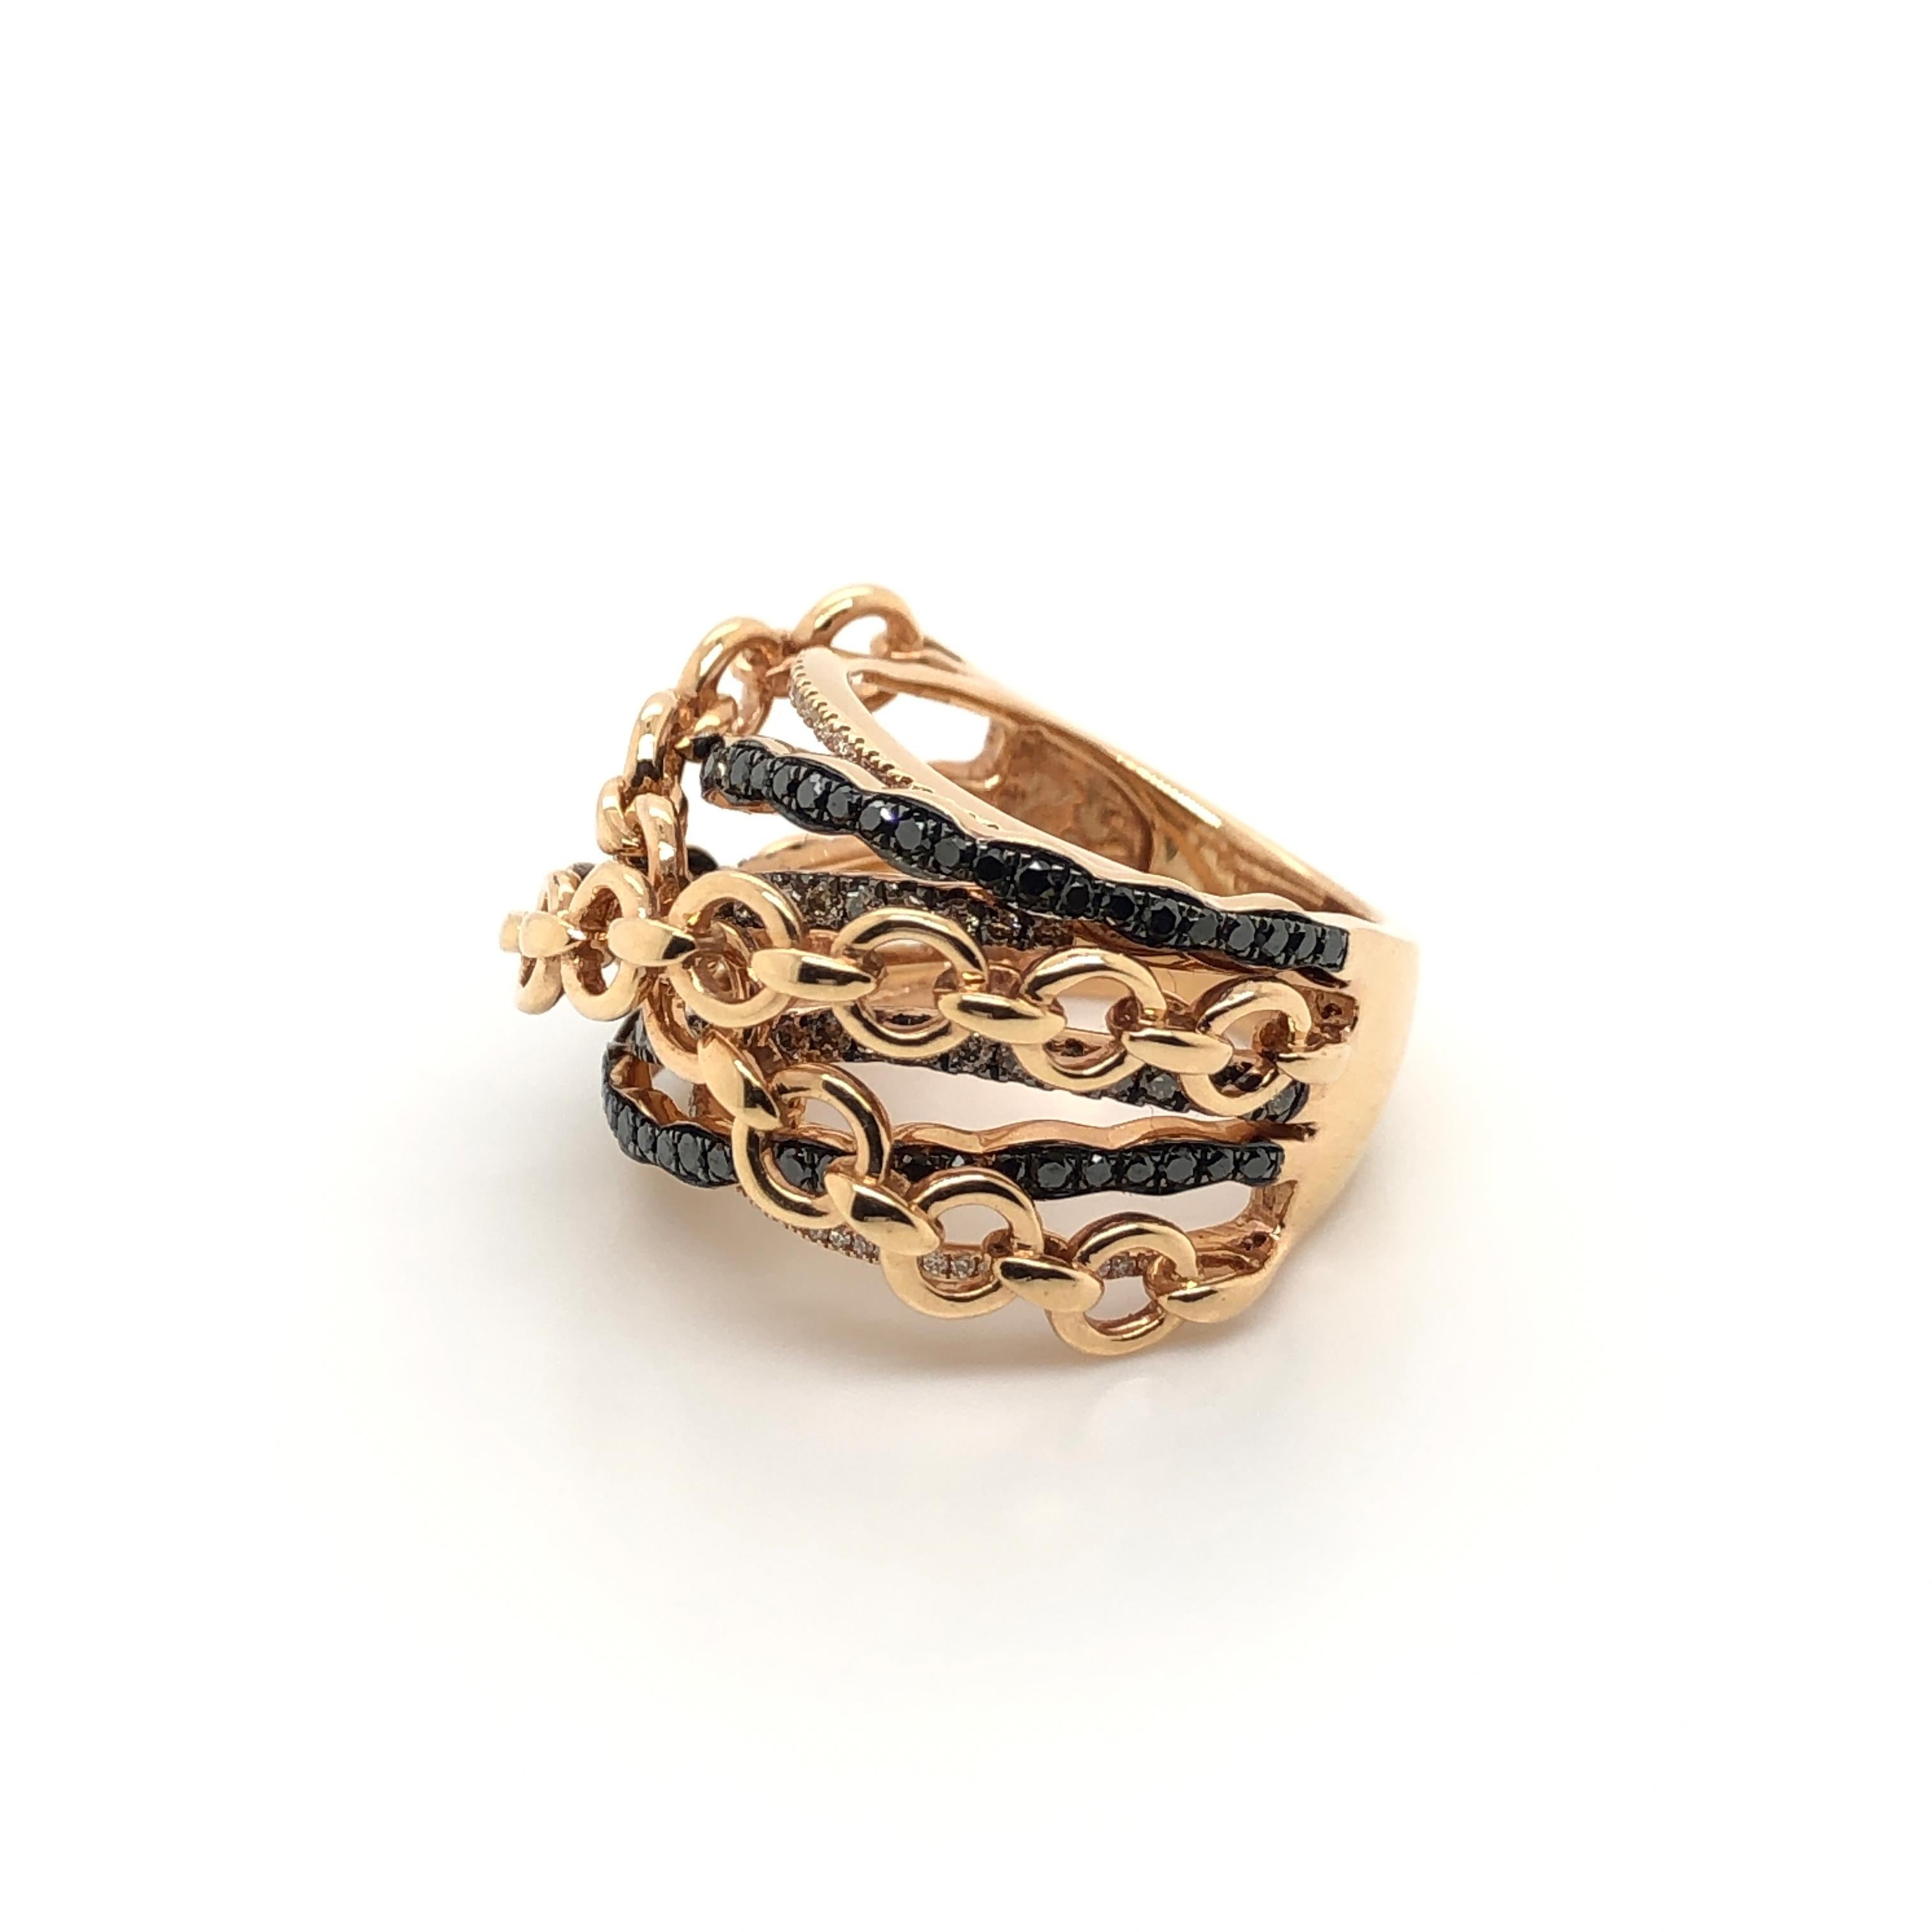 Le Vian's iconic Gladiator design has evolved into many different styles  including this Le Vian Exotic 14K rose gold ring featuring straps of unsual links overlapping straps of Black Diamonds (1/2 ct. t.w.), Chocolate Diamonds(3/8 ct. t.w.)  and